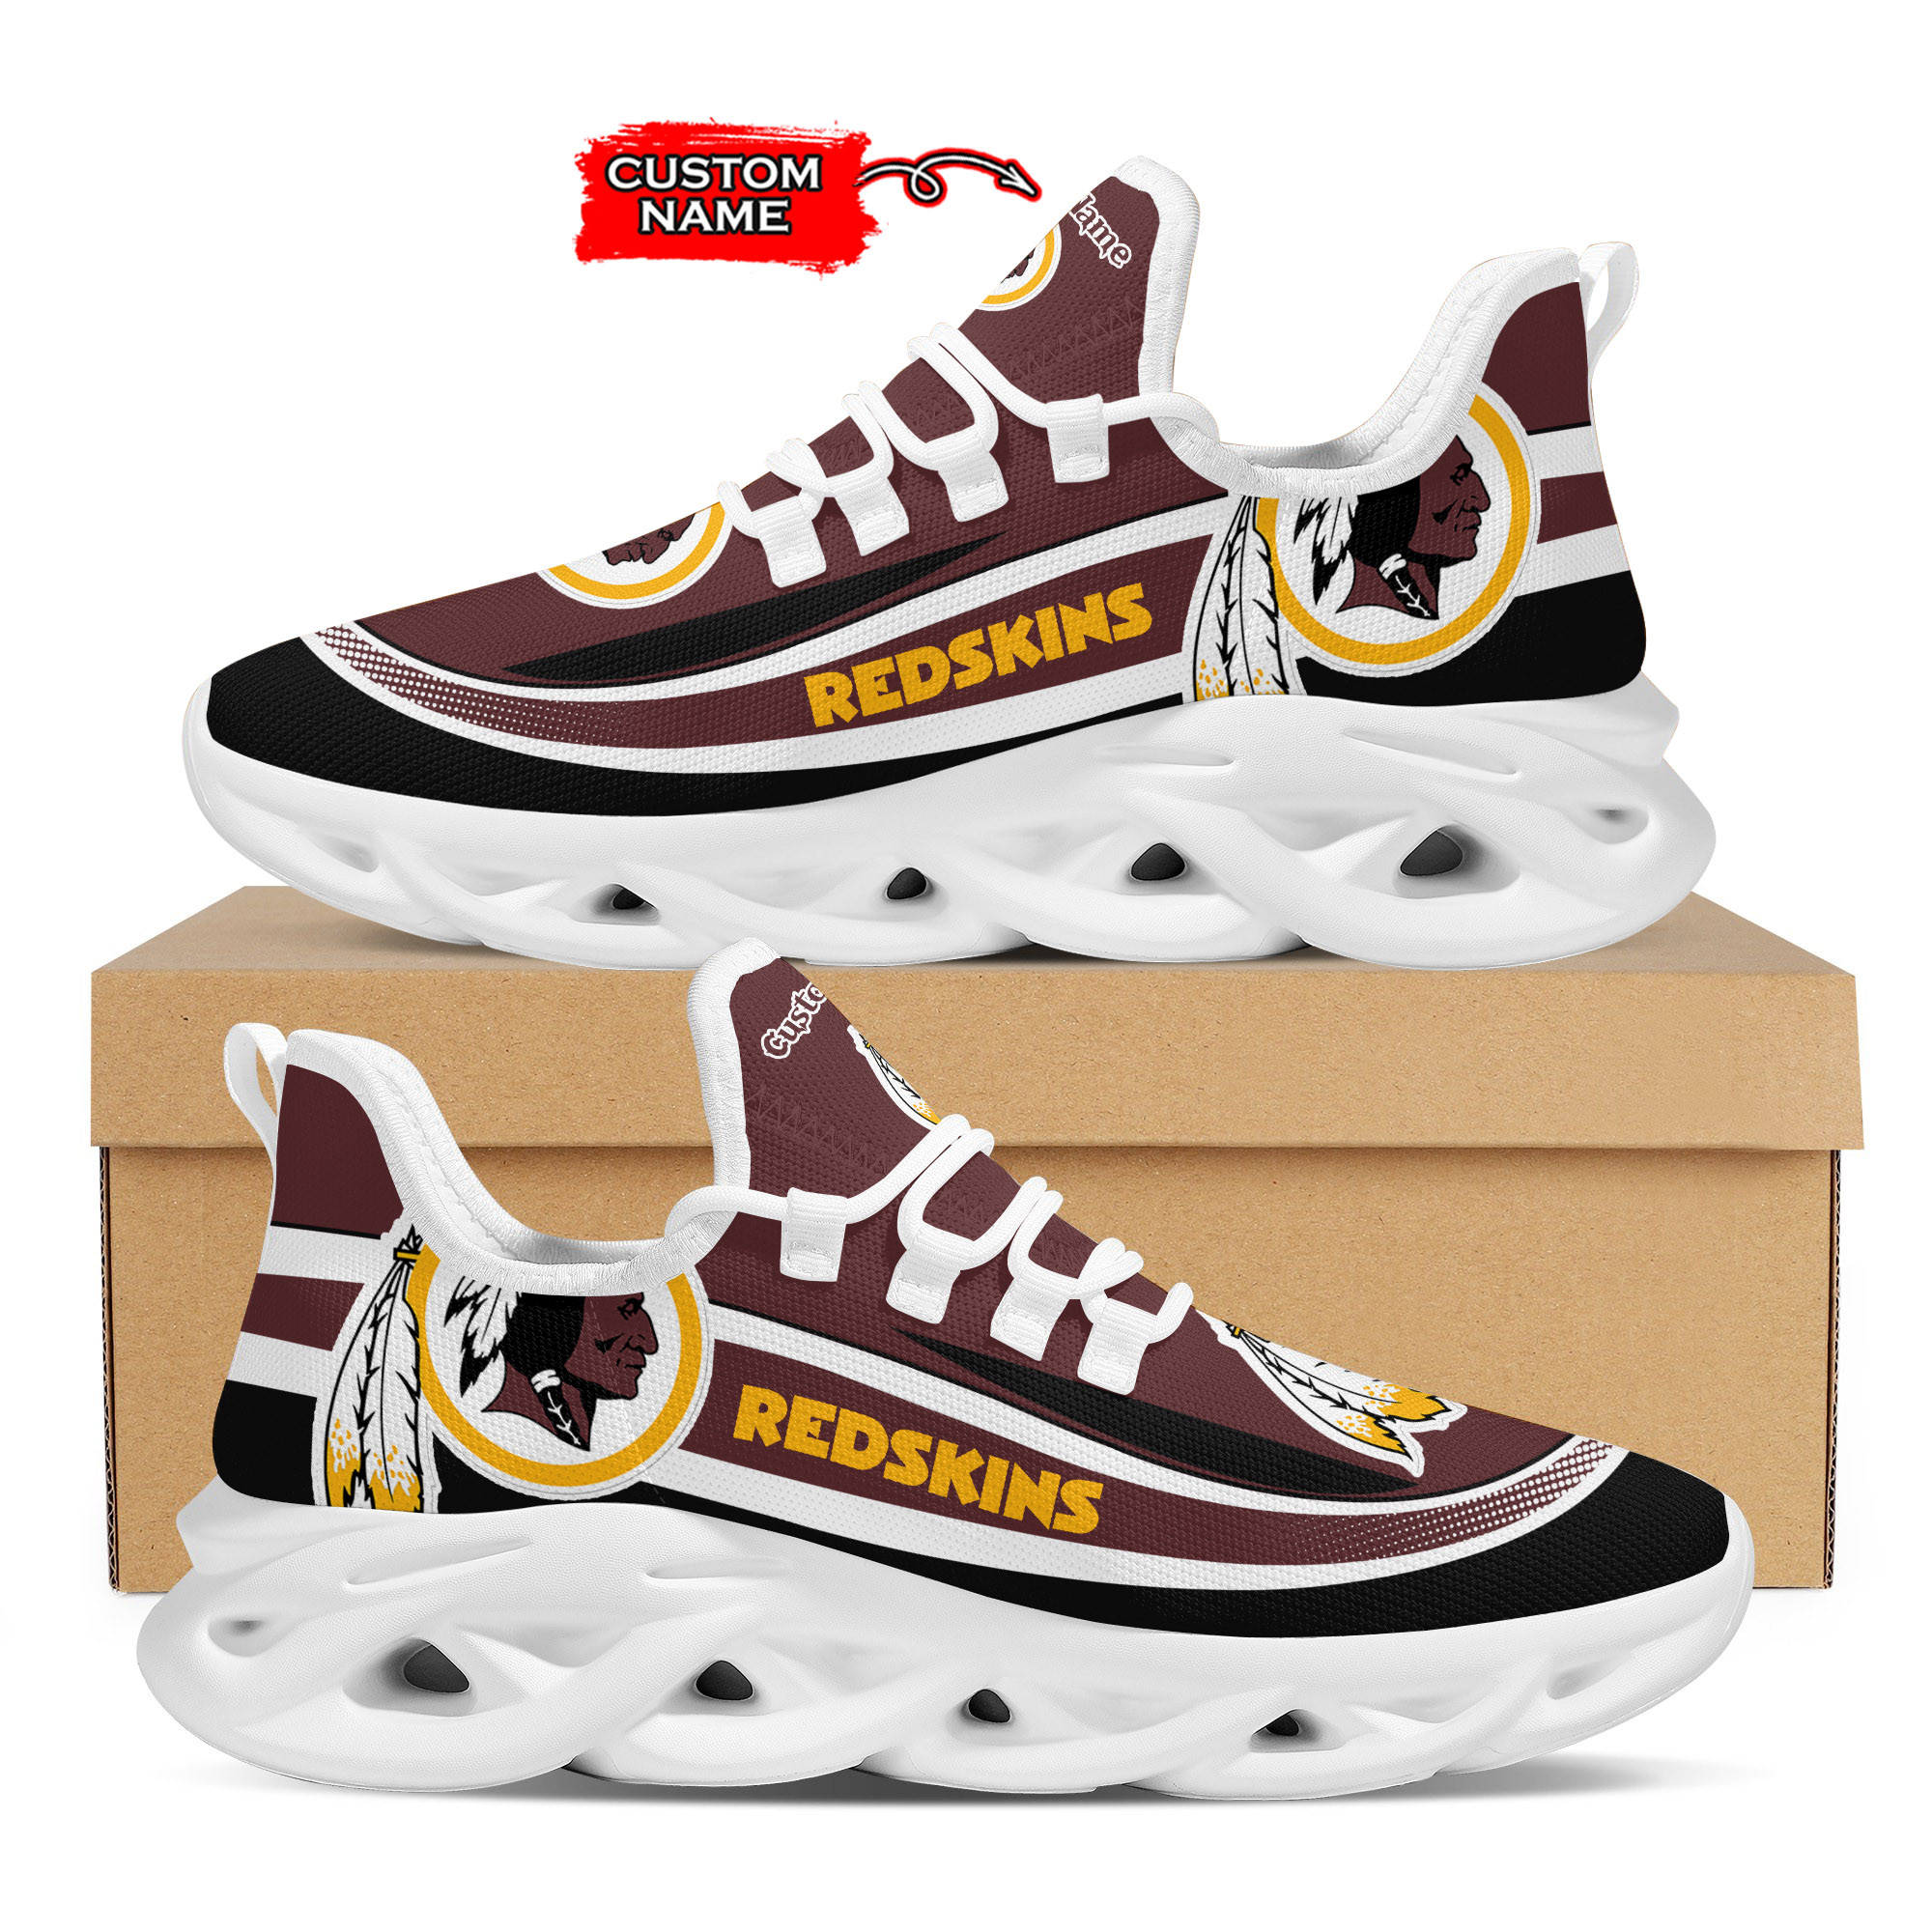 Washington Redskins Nfl Custom Name Clunky Max Soul Shoes Sneakers For Mens Womens Personalized Gifts – Hothot